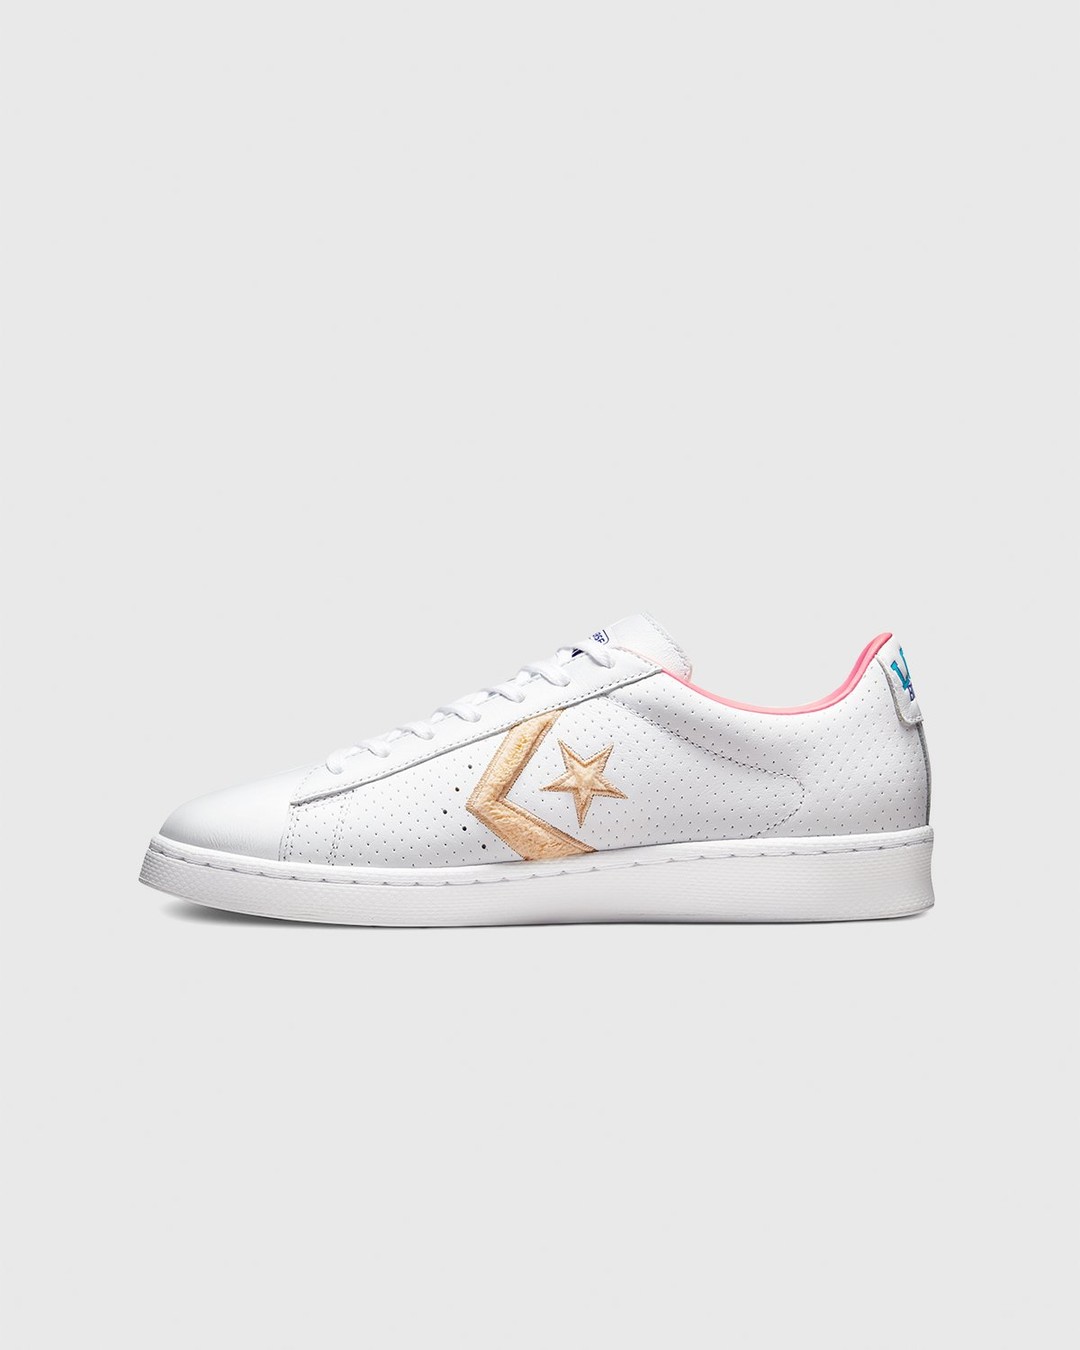 Converse x Space Jam – Pro Leather White - Low Top Sneakers - White - Image 5